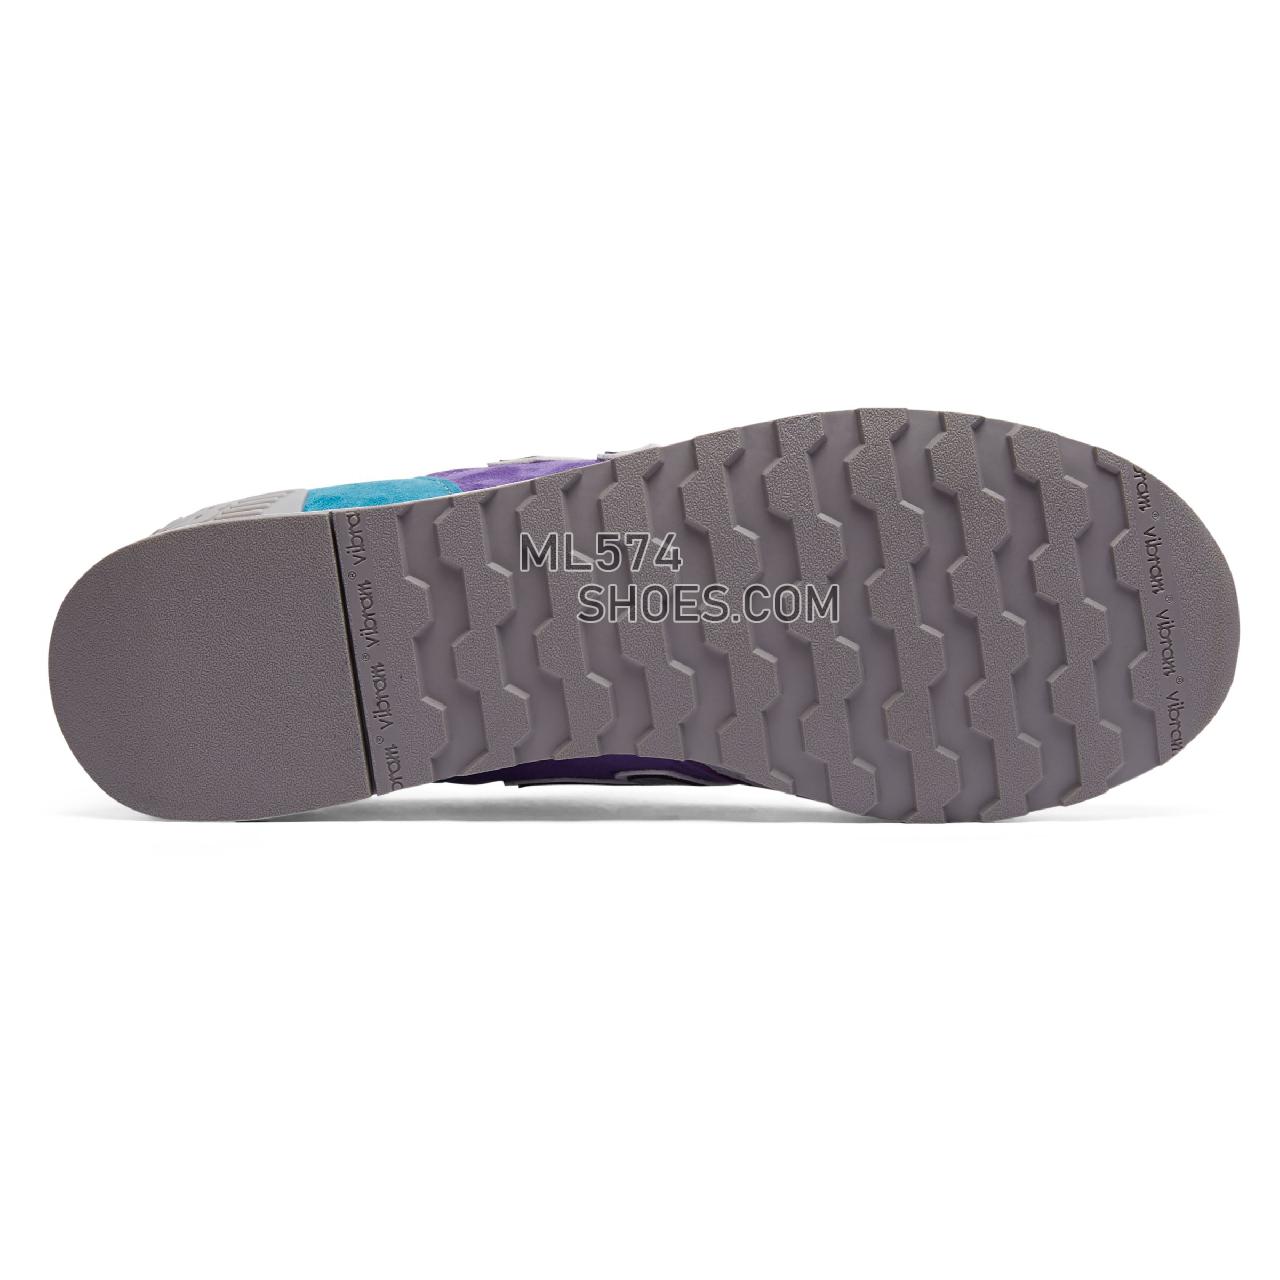 New Balance MADE in UK 670 - Men's Made in USA And UK Sneakers - Grey with purple and teal - M670GPT